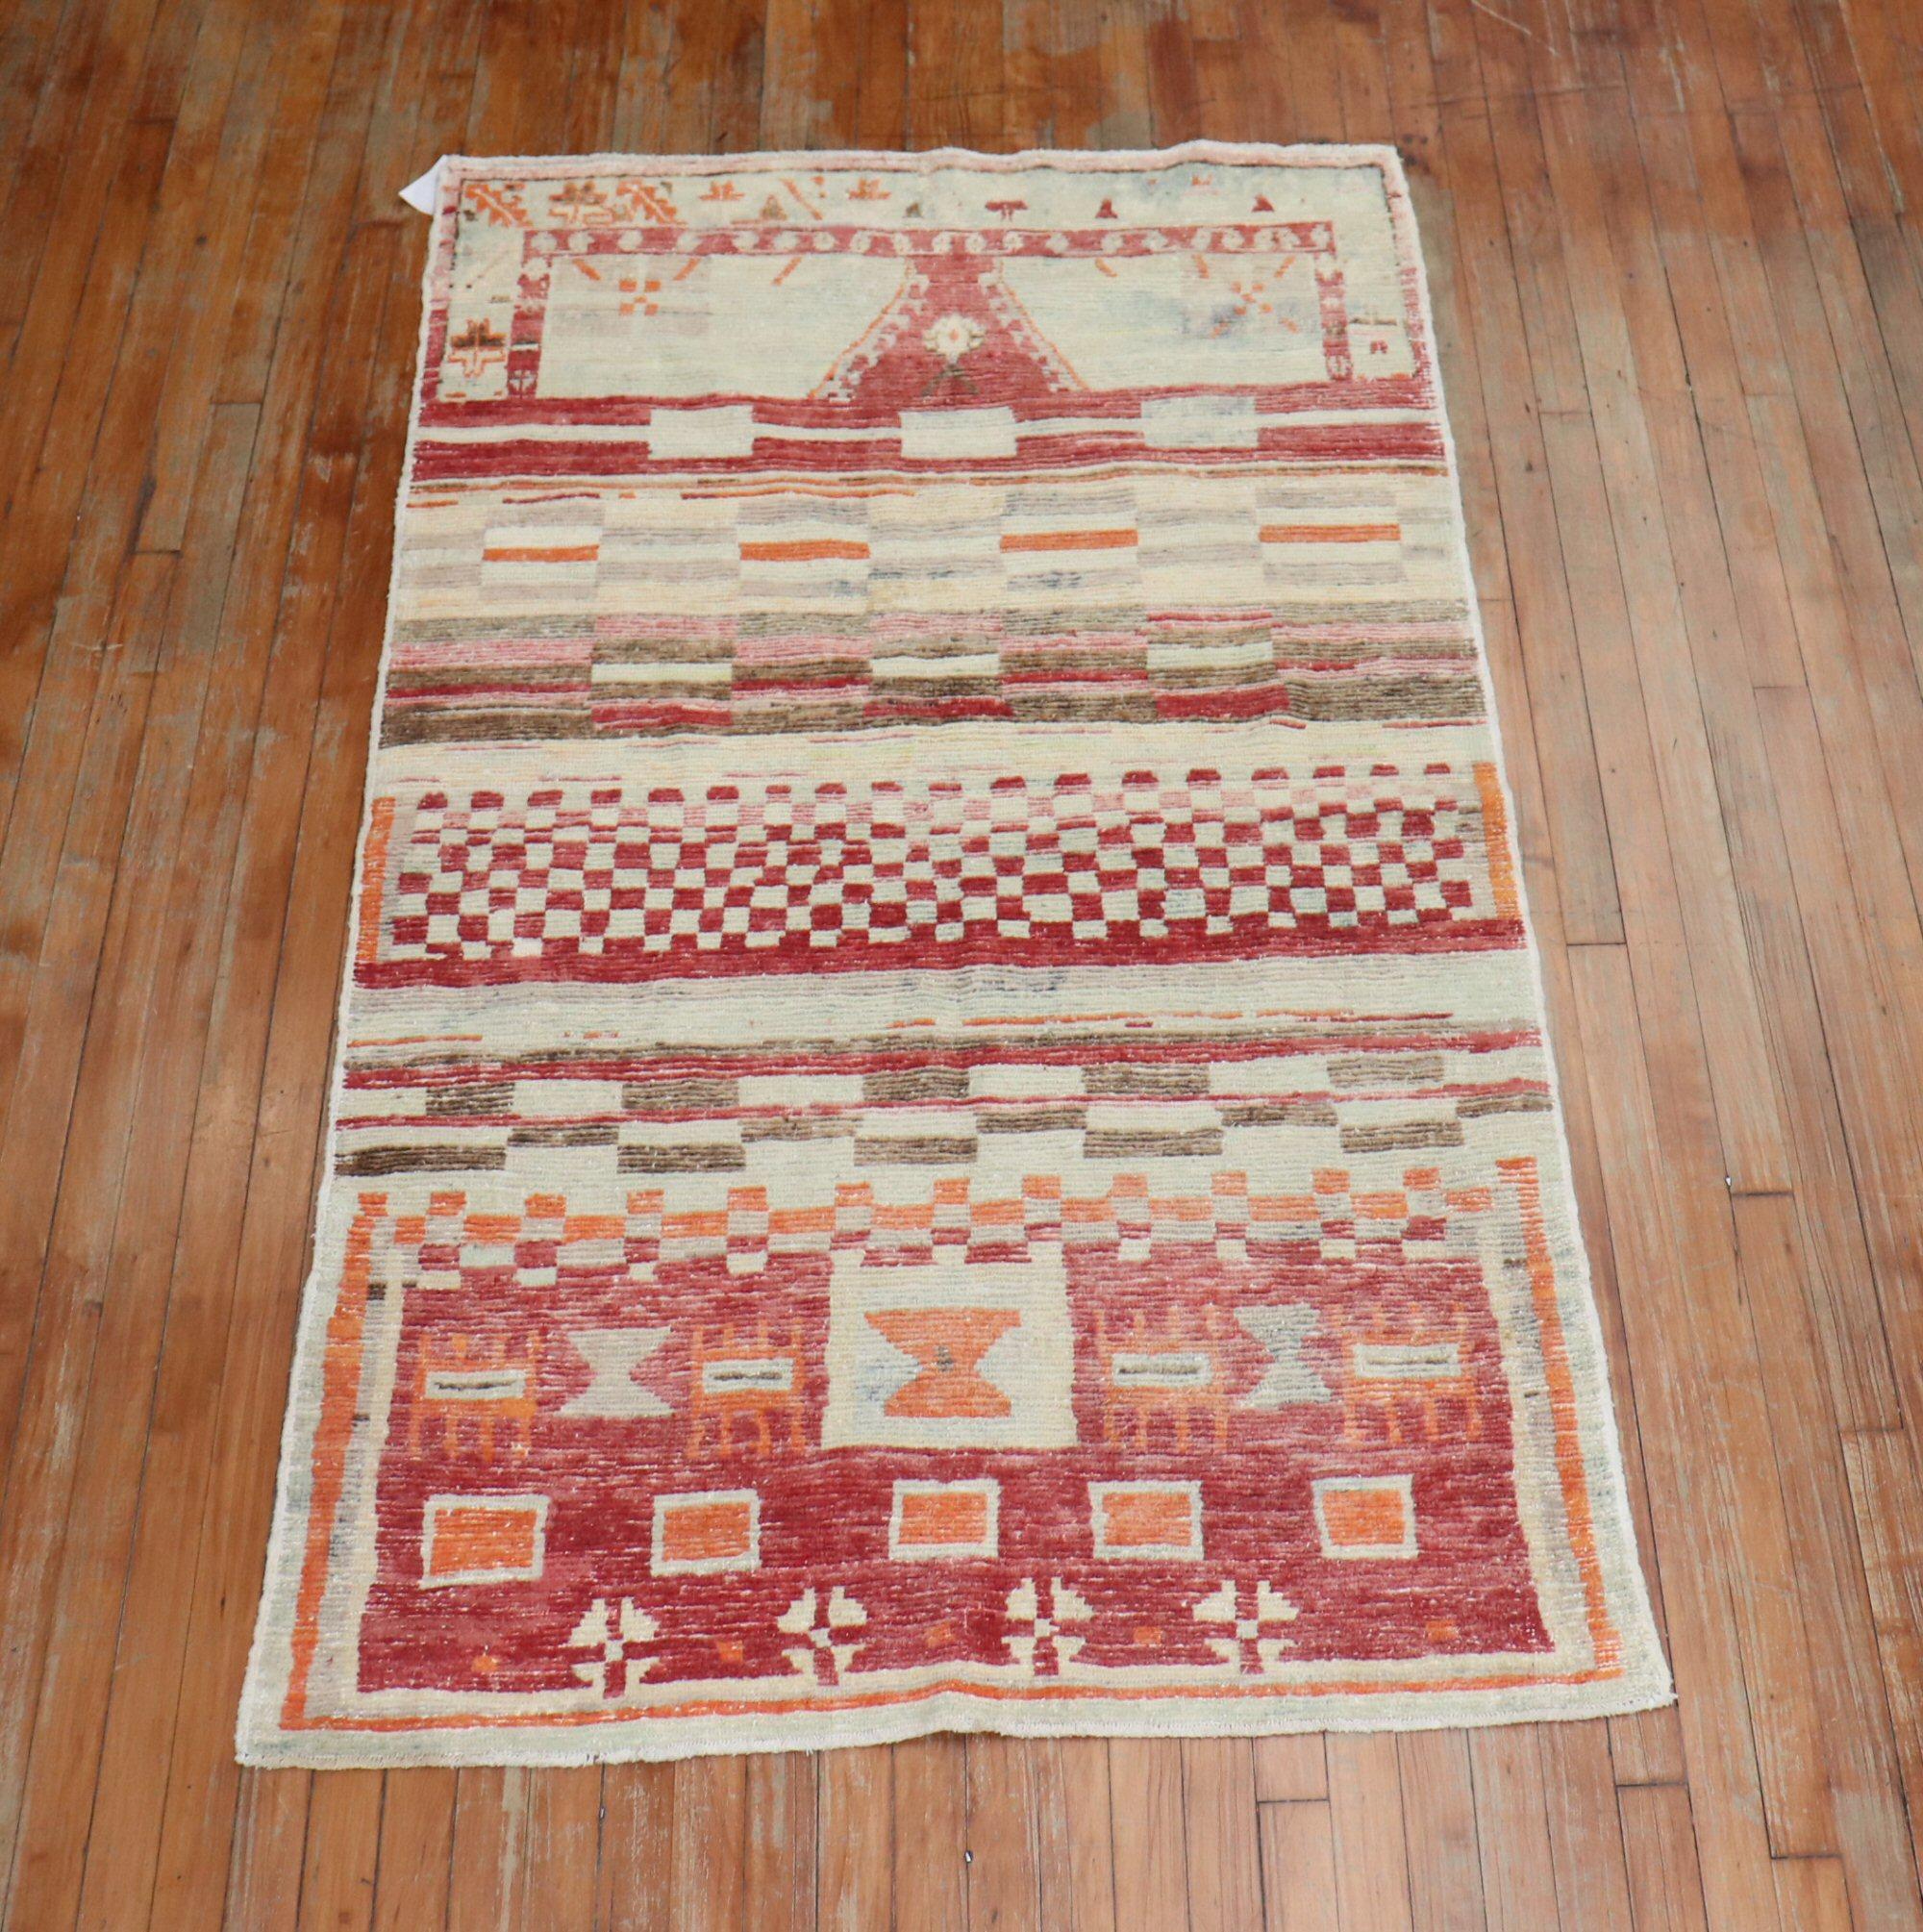 An abstract midcentury Turkish Anatolian rug with a brick red field with accents in orange and brown.

Size: 3'8” x 6'6”

Turkish carpets and rugs, whether hand knotted or flat-woven, are among the most well-known and established handcrafted art